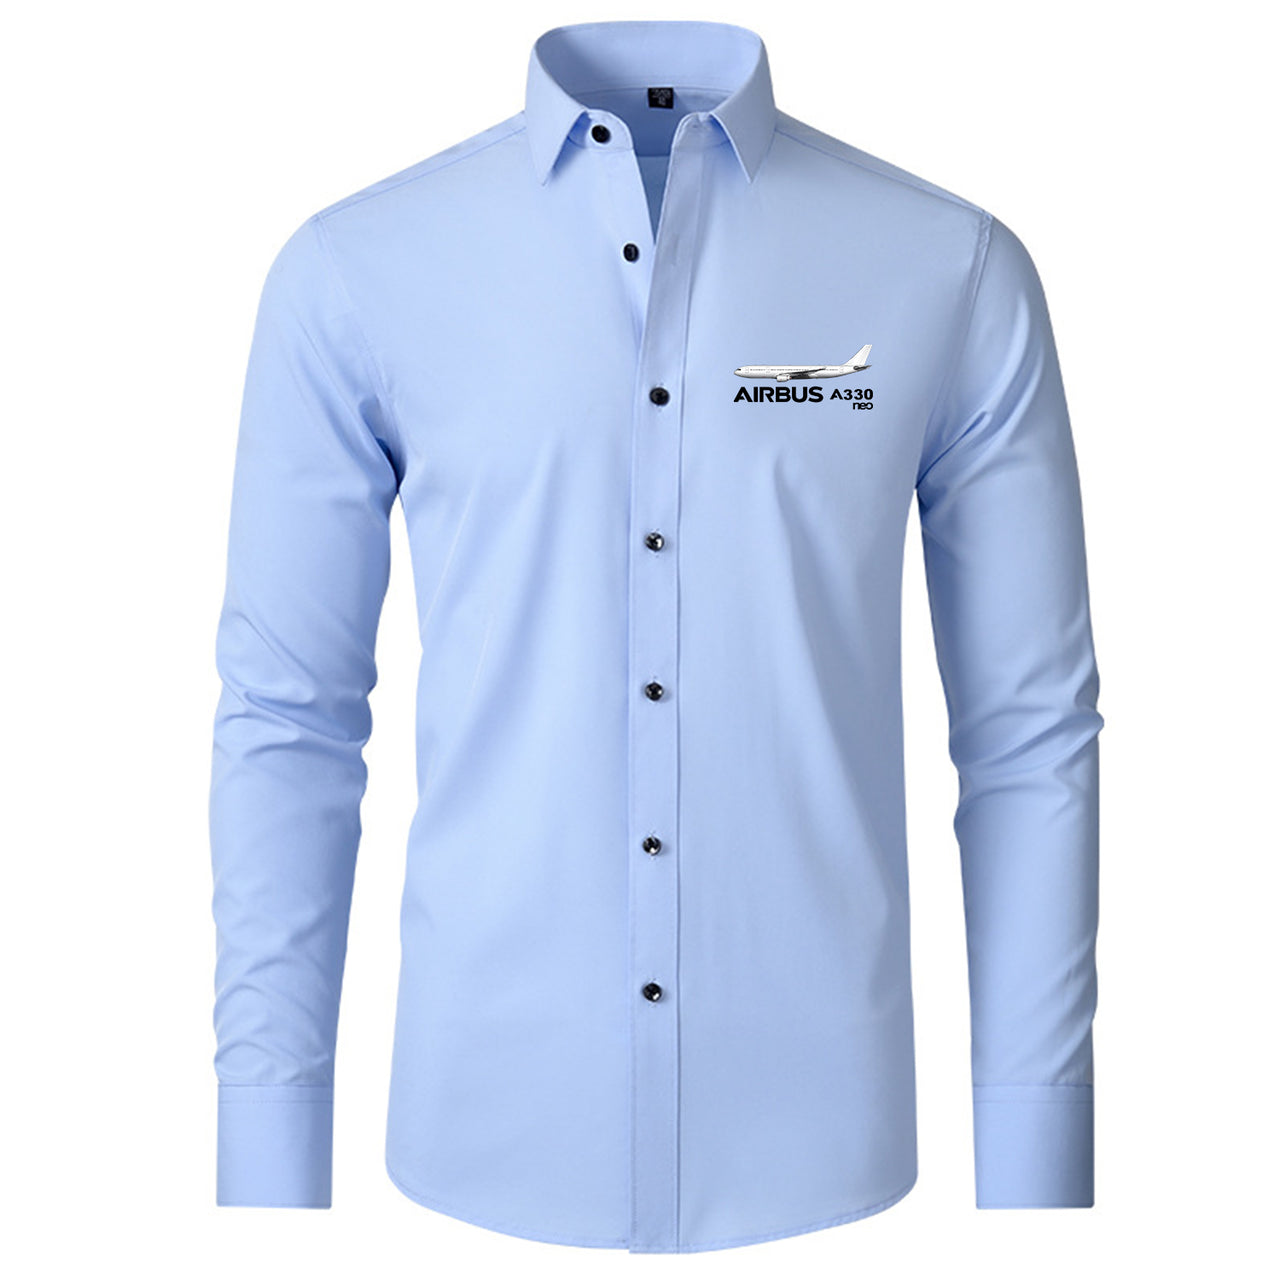 The Airbus A330neo Designed Long Sleeve Shirts